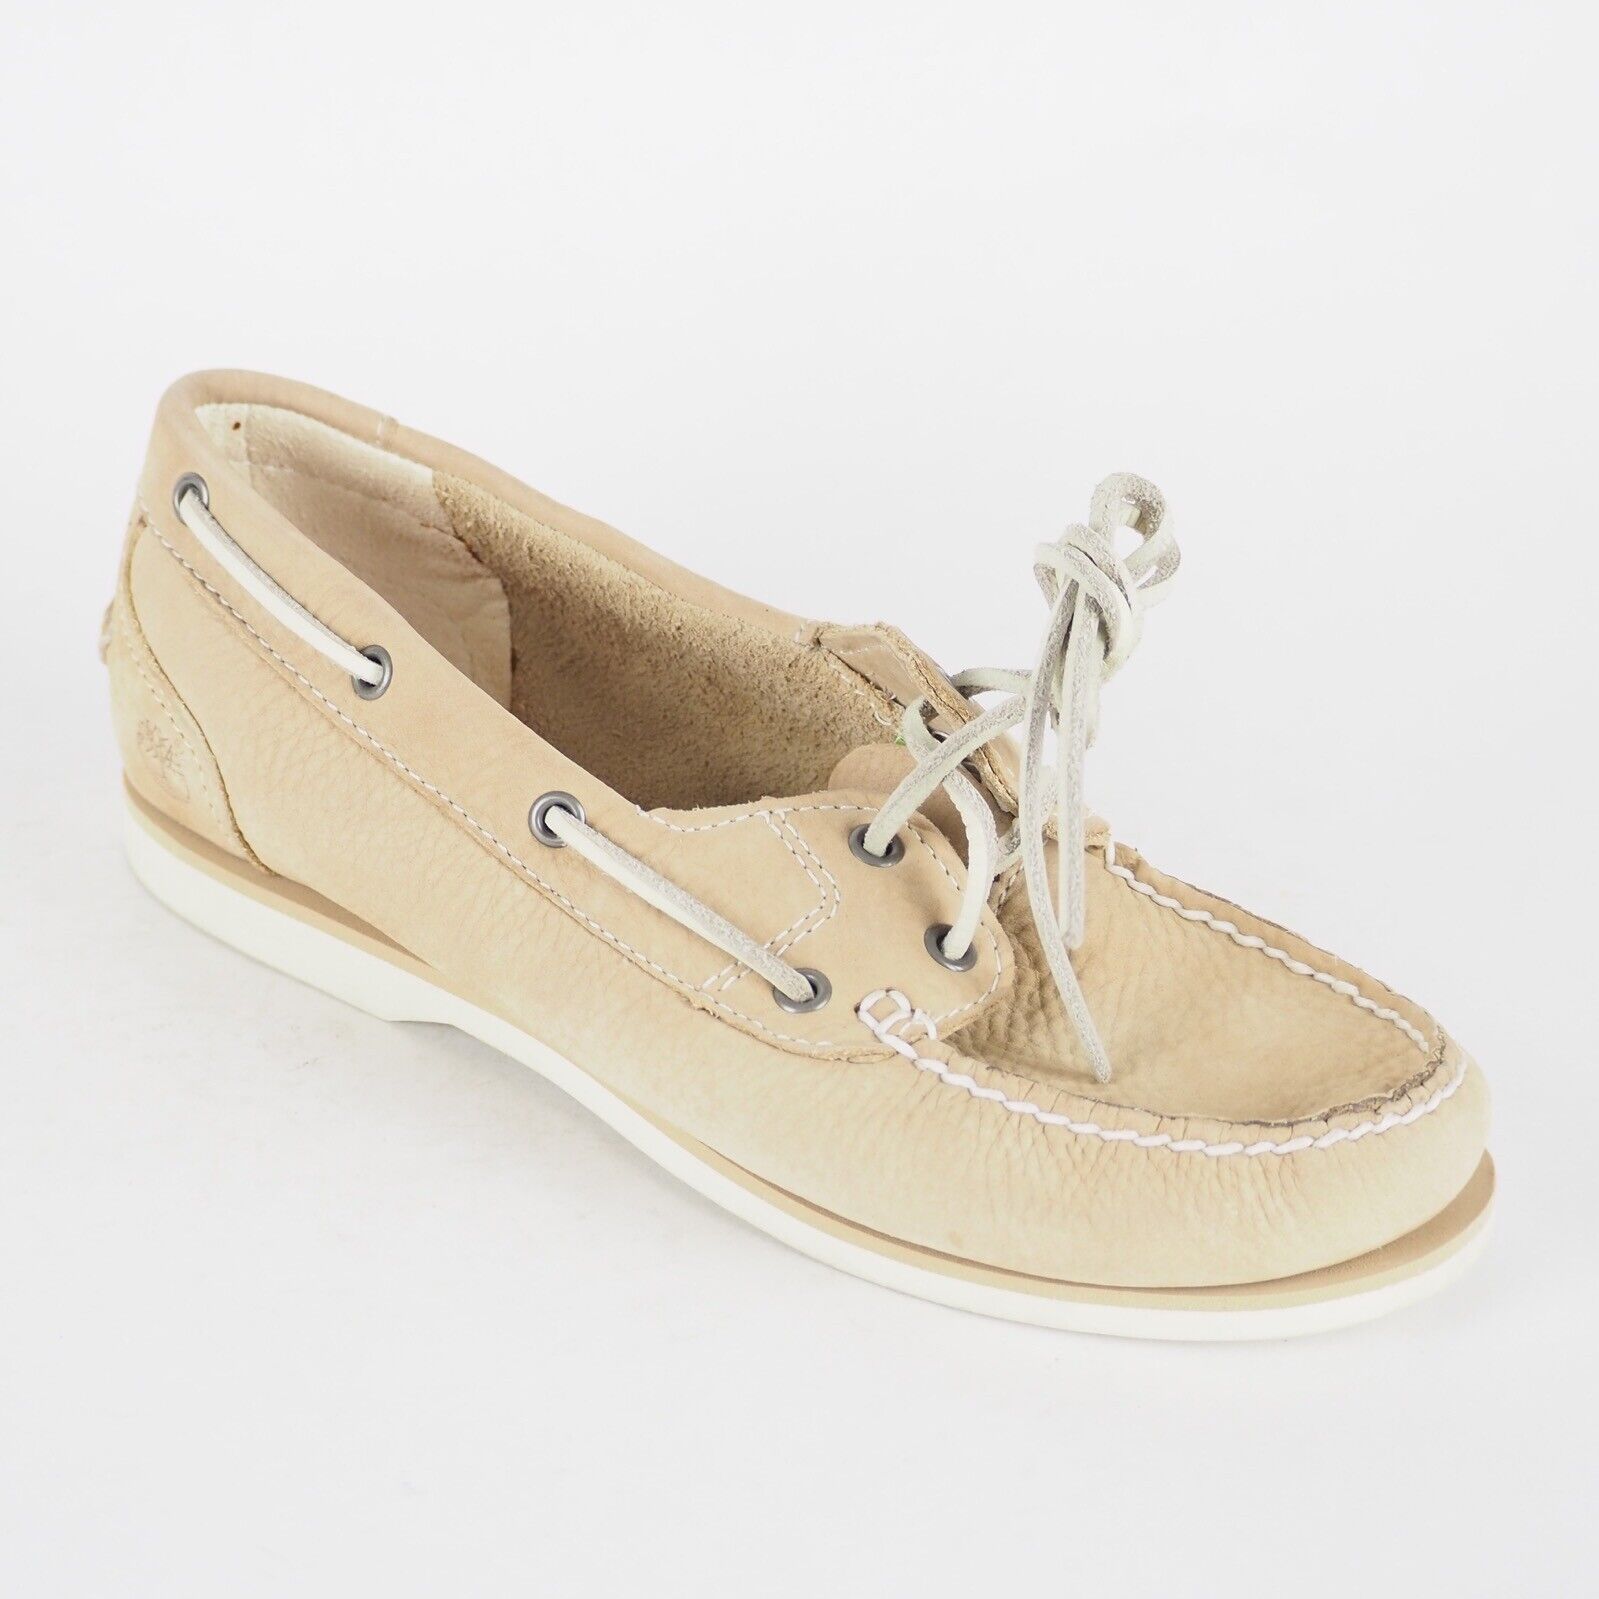 Womens Timberland Classic 2 Eye 3941R Cream Leather Lace Up Boat Shoes UK 3.5